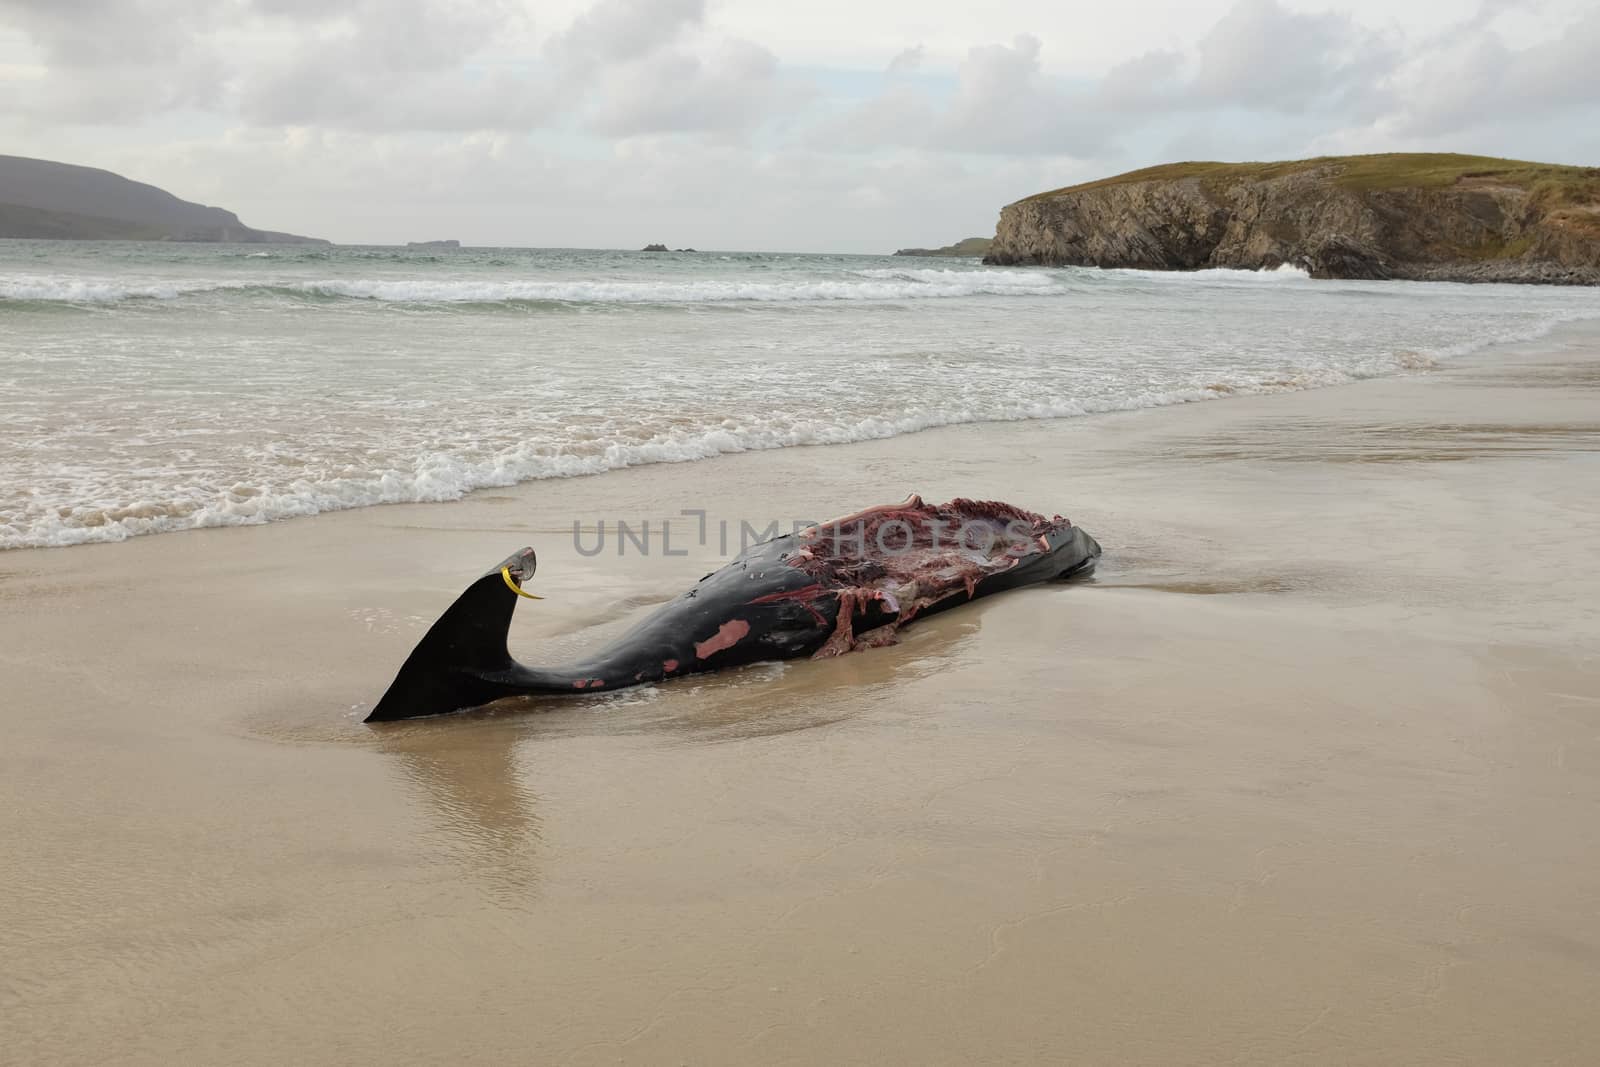 The carcass of a beaked whale, Ziphiidae, tagged and disemboweled on a beach.